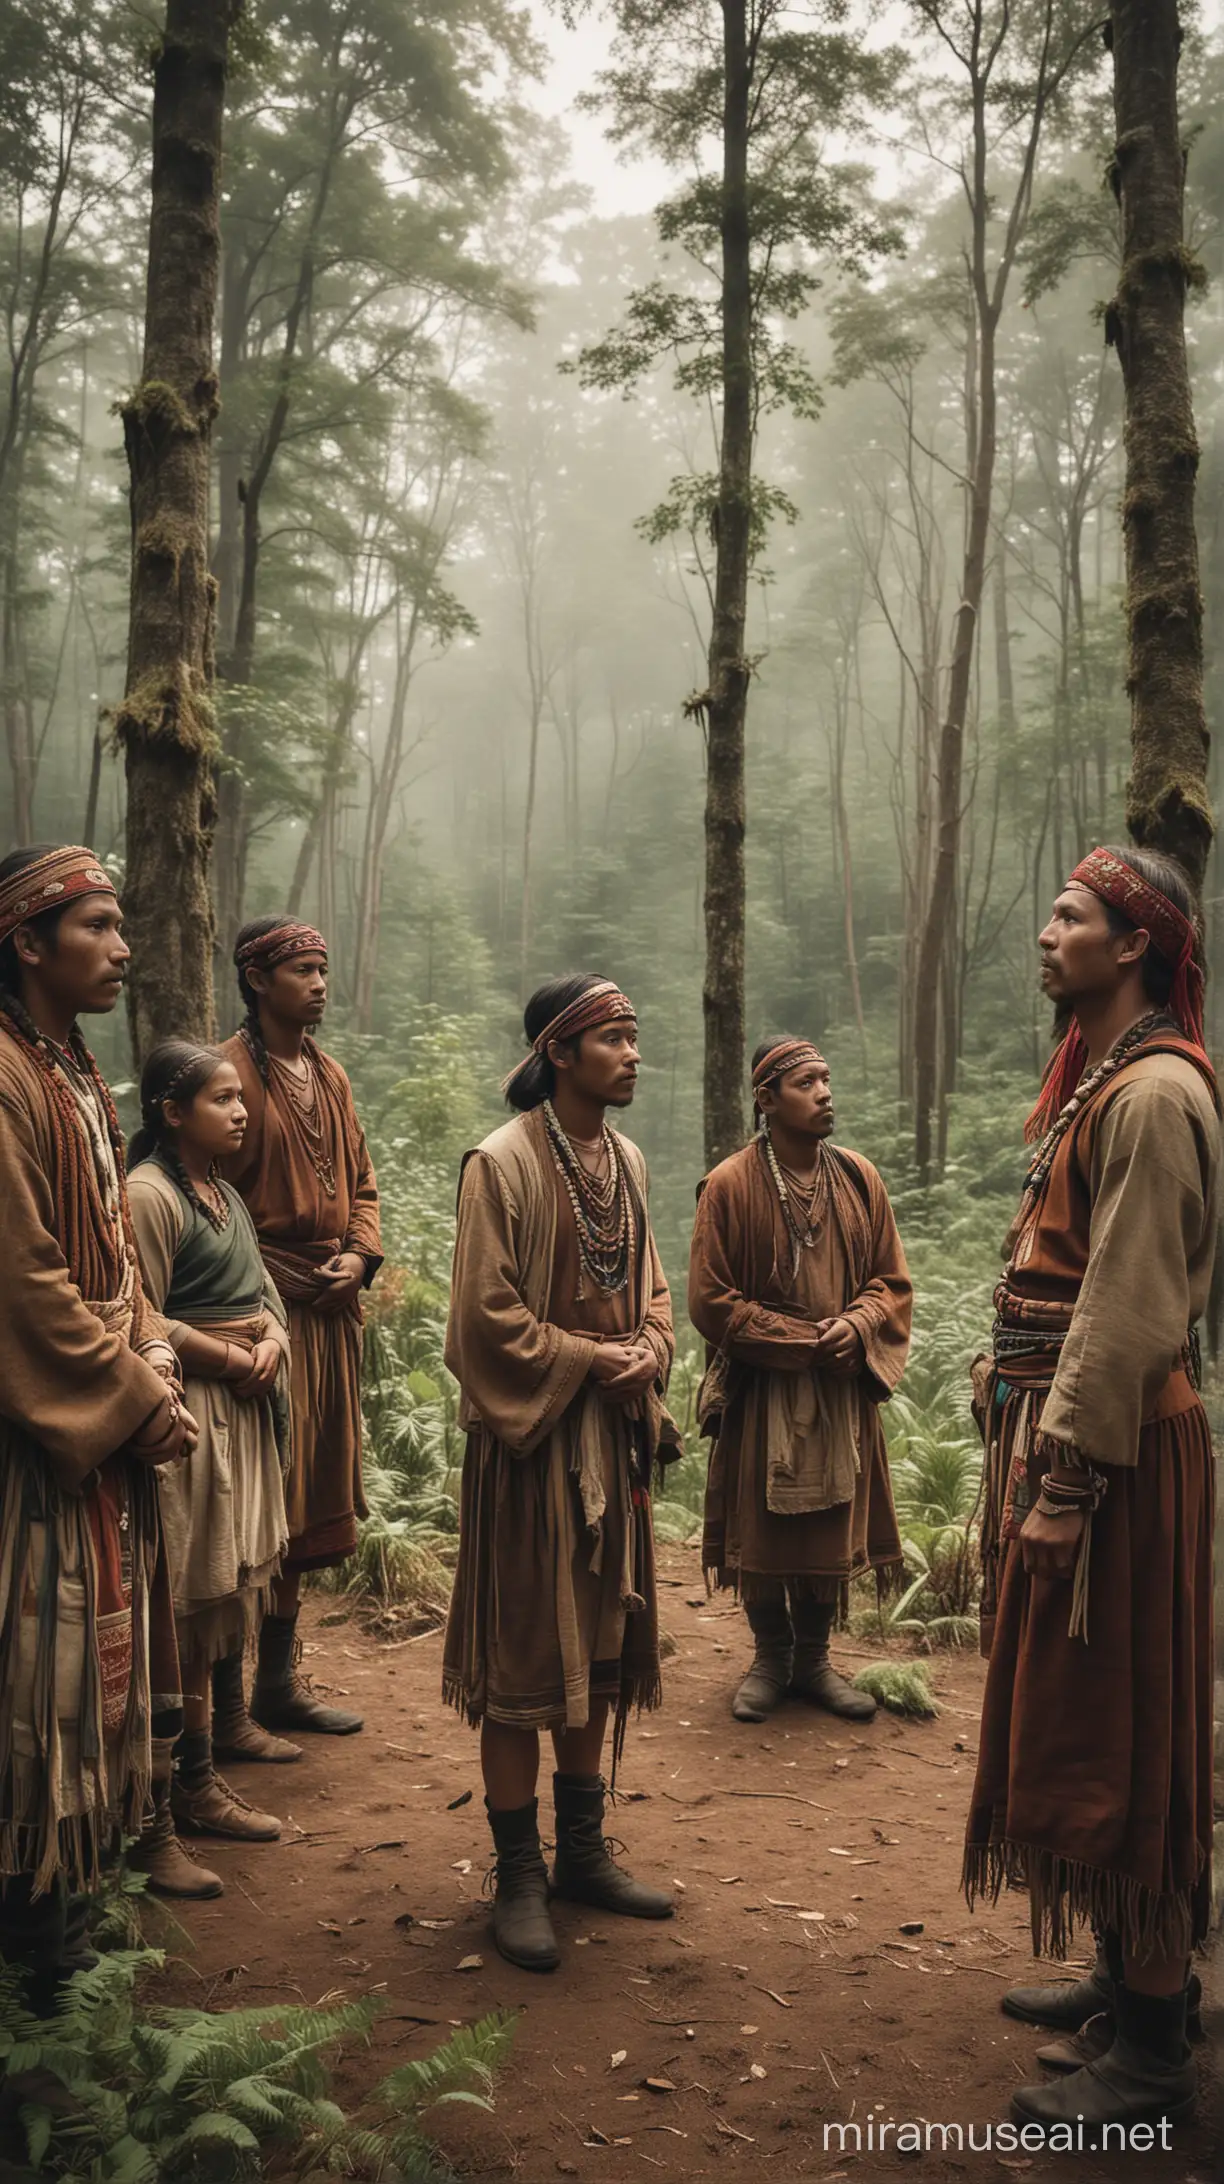 Fore Tribe Members in Traditional Attire Gather Amidst Mysterious Forest